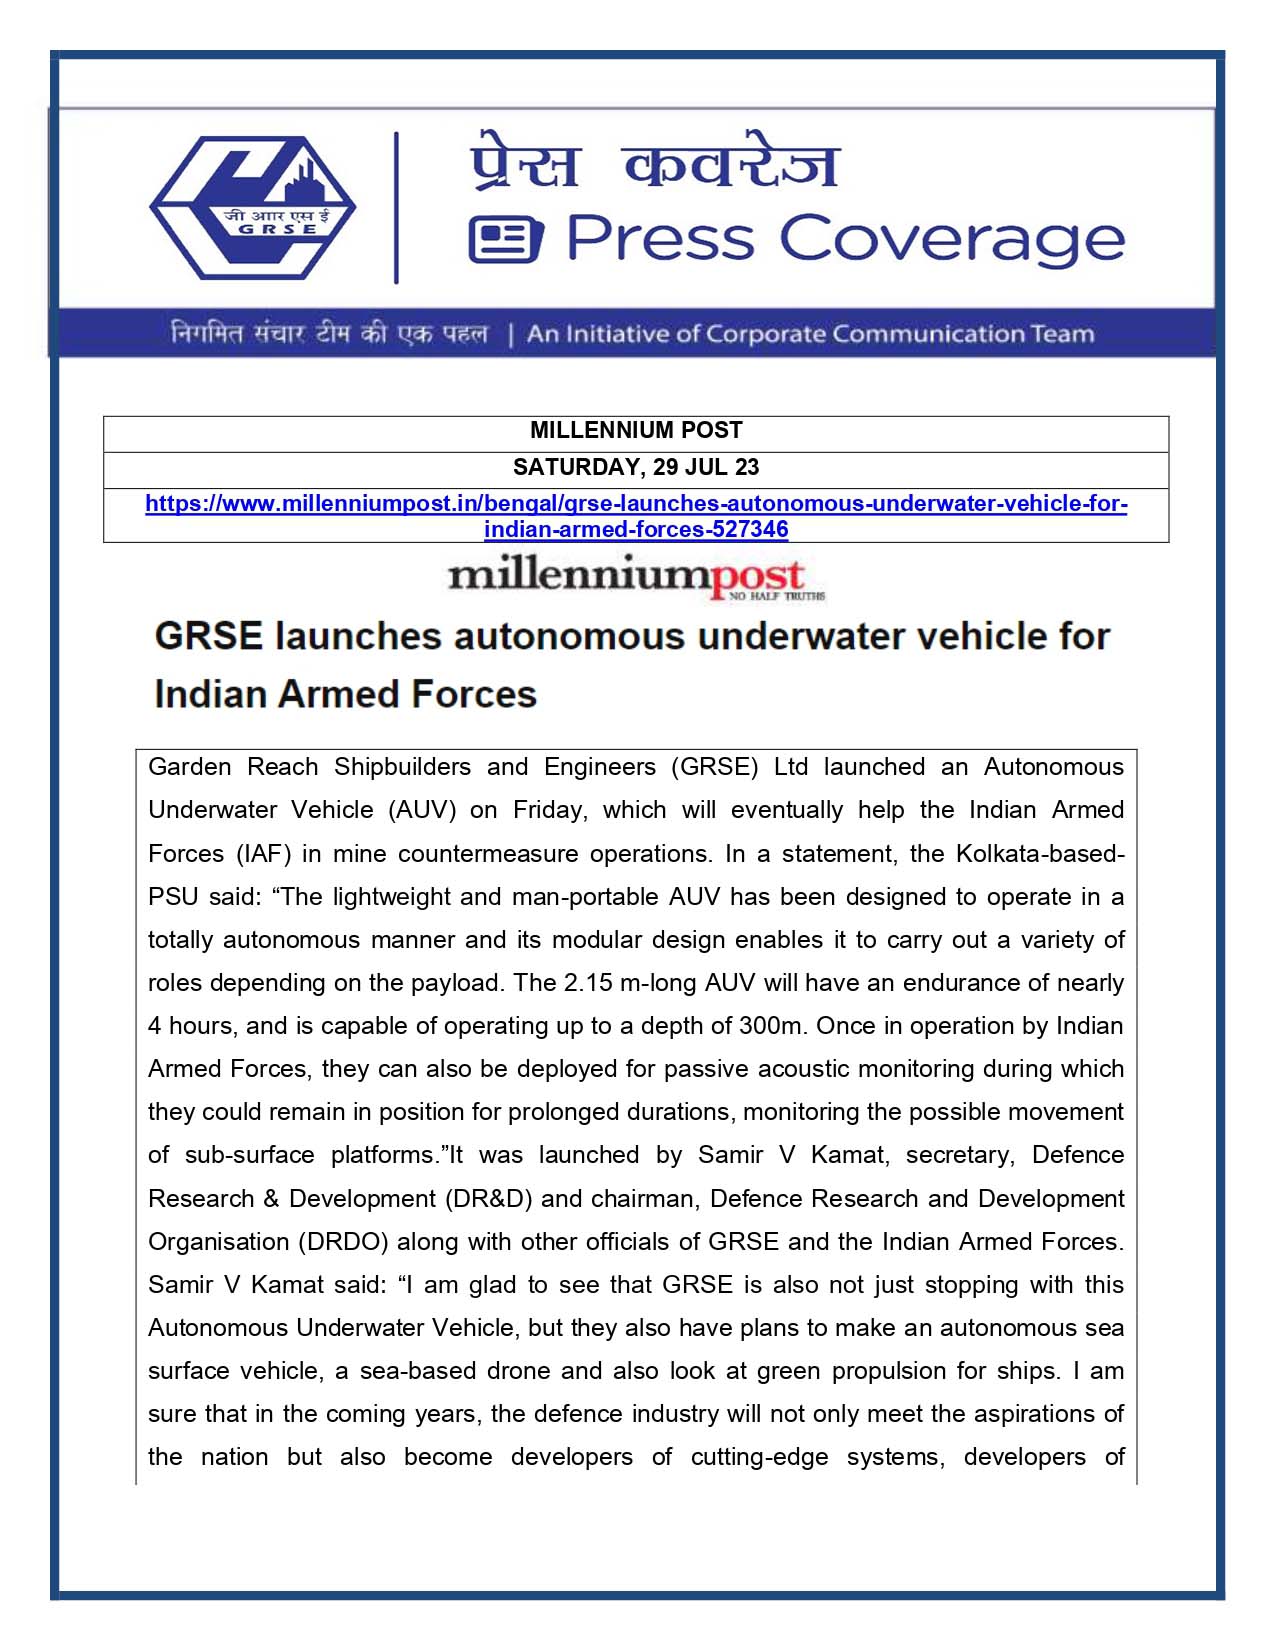 Press Coverage : The Millenium Post, 29 Jul 23 : GRSE launches autonomous underwater vehicle for Indian Armed Forces